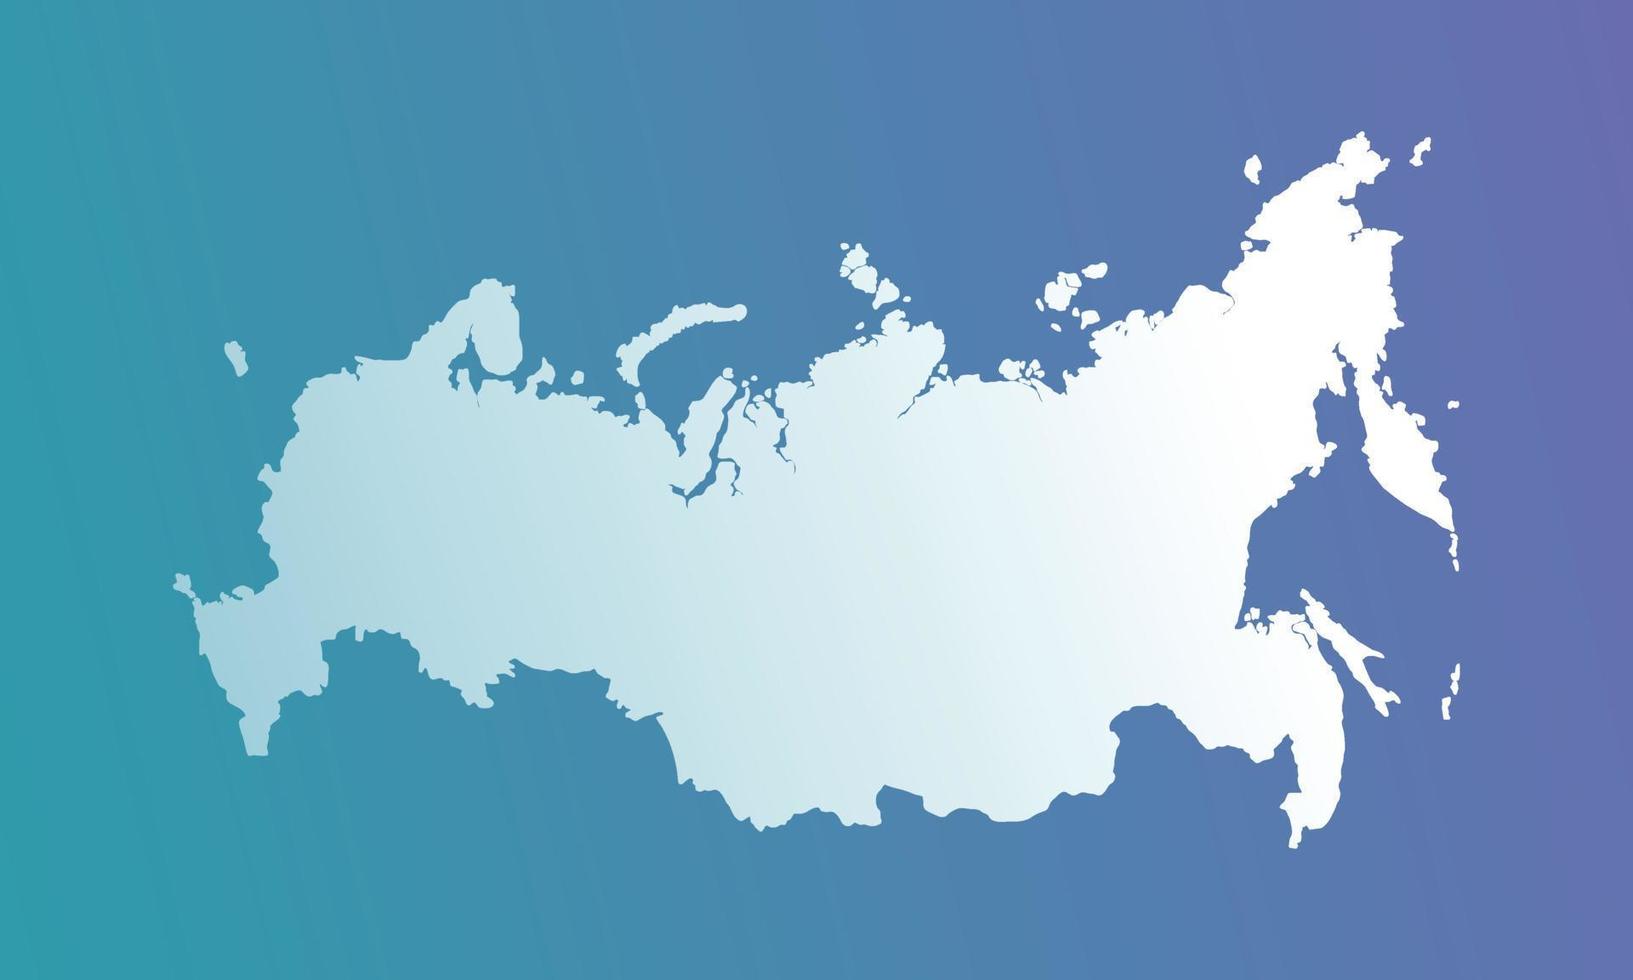 Russia background with blue and purple gradient vector